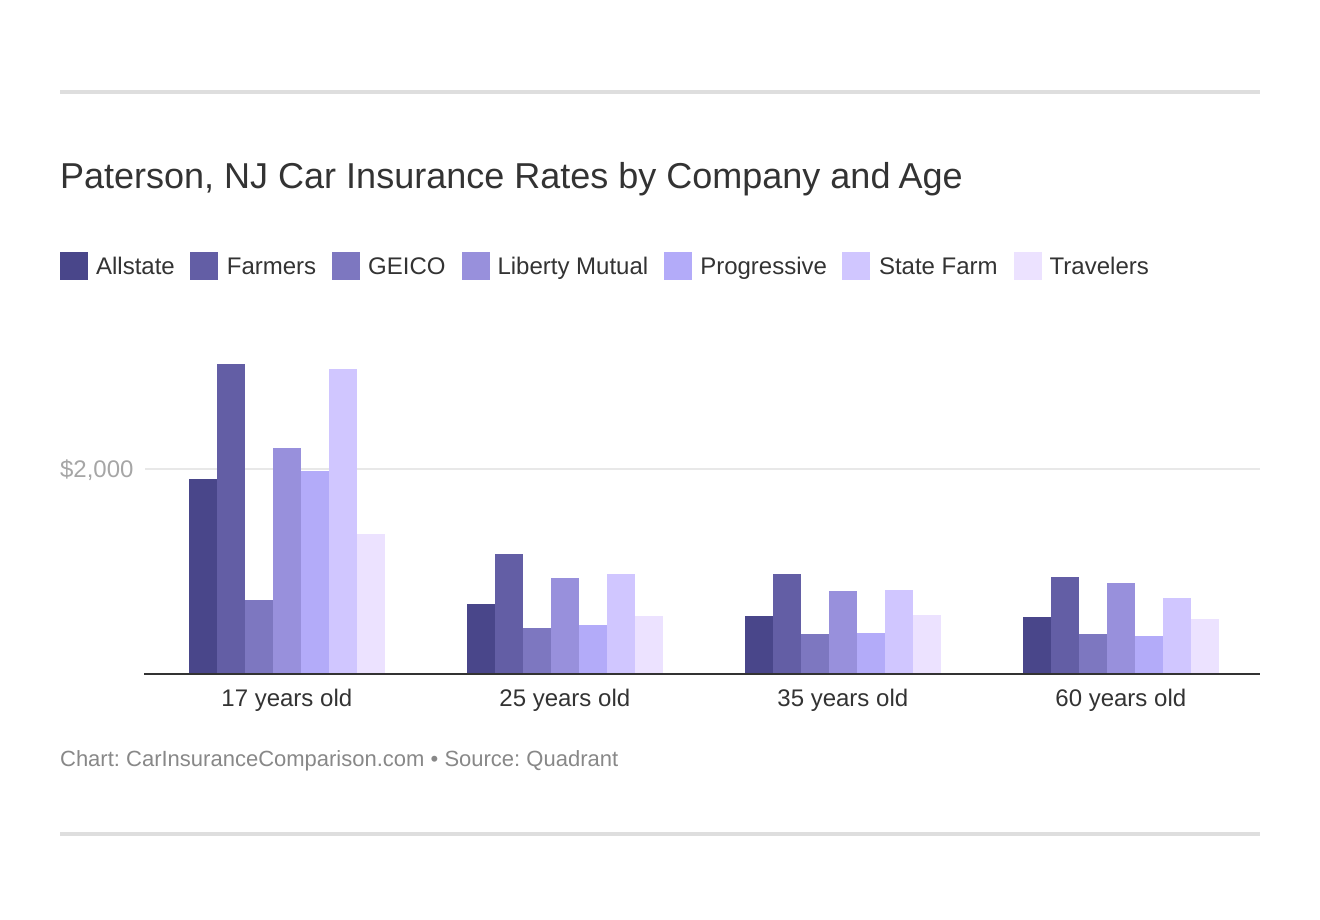 Paterson, NJ Car Insurance Rates by Company and Age